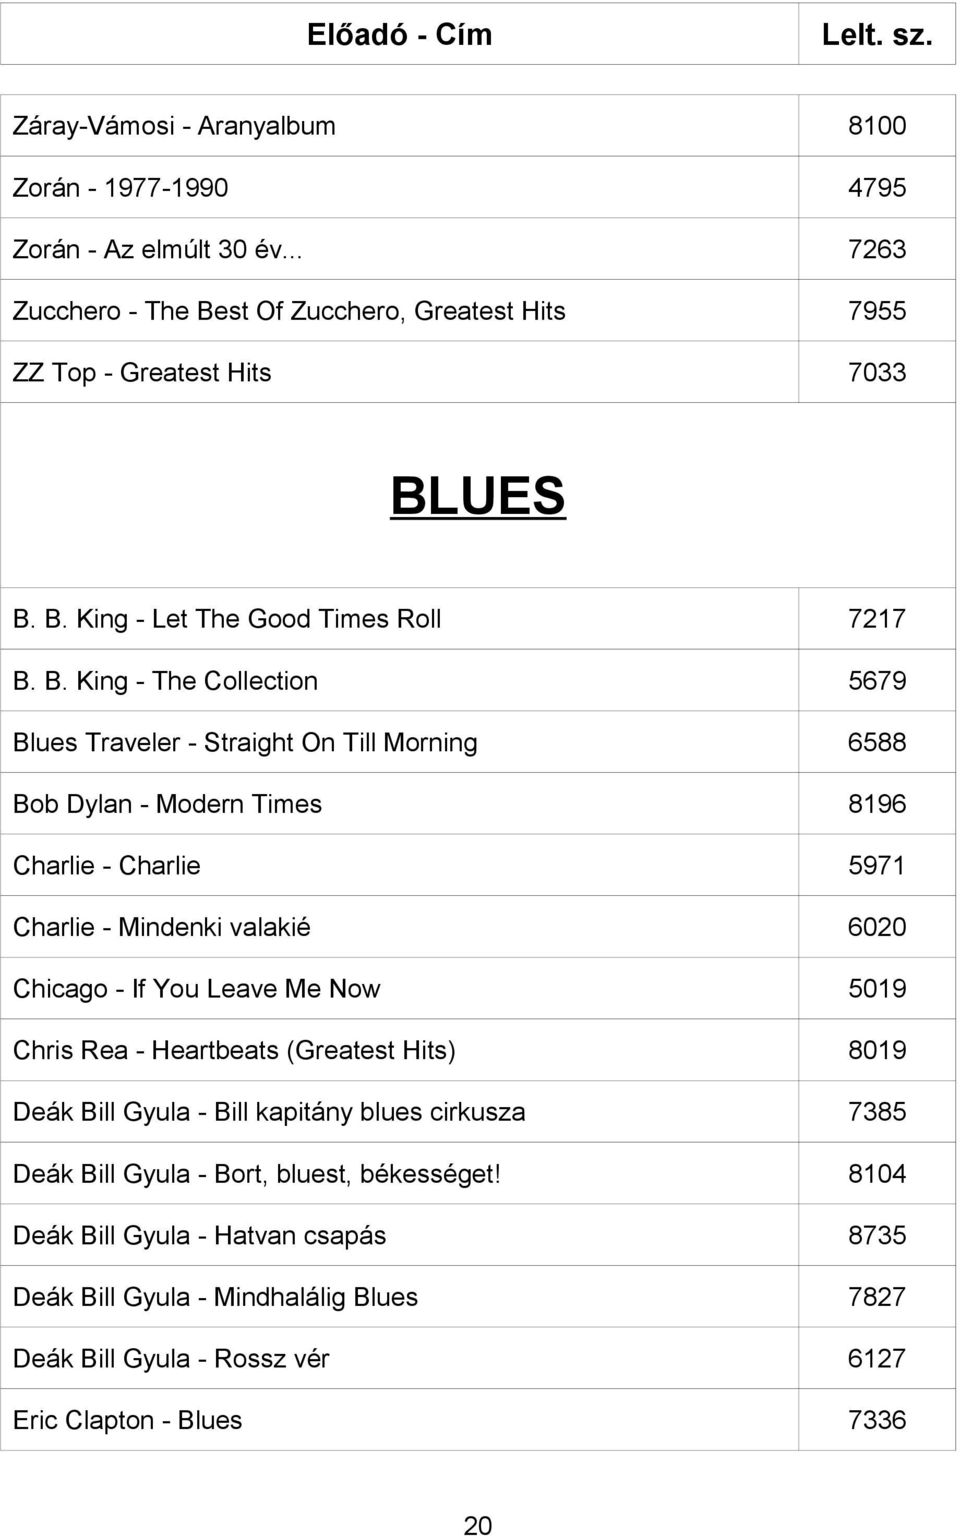 B. King - The Collection 5679 Blues Traveler - Straight On Till Morning 6588 Bob Dylan - Modern Times 8196 Charlie - Charlie 5971 Charlie - Mindenki valakié 6020 Chicago - If